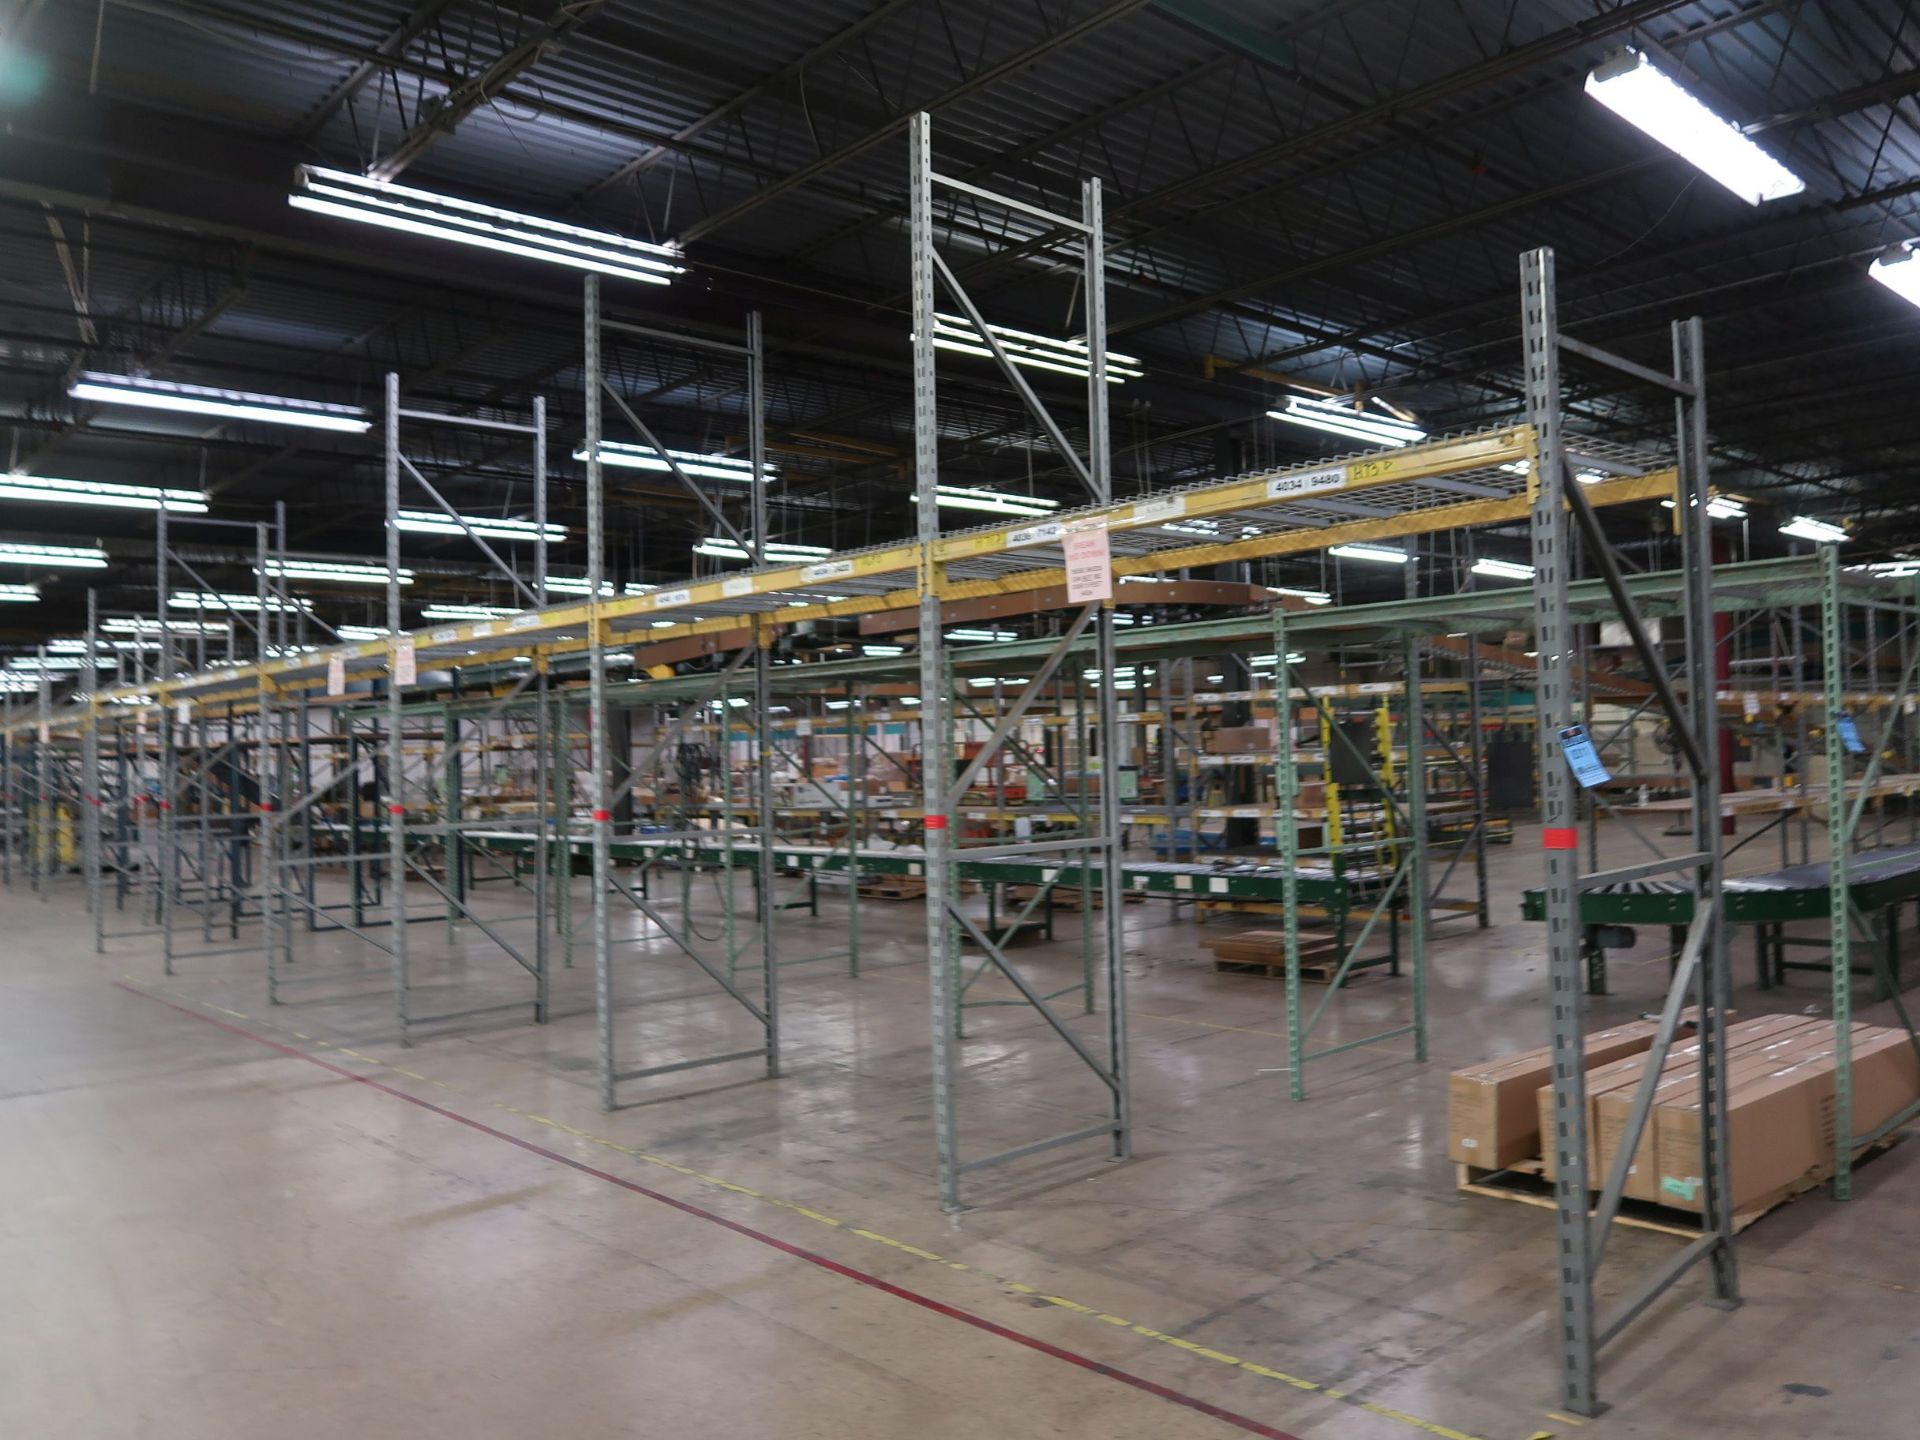 SECTIONS 96" X 42" X 120" ADJUSTABLE BEAM PALLET RACK; (7) 42" X 120" UPRIGHTS, (12) 96" CROSSBEAMS,